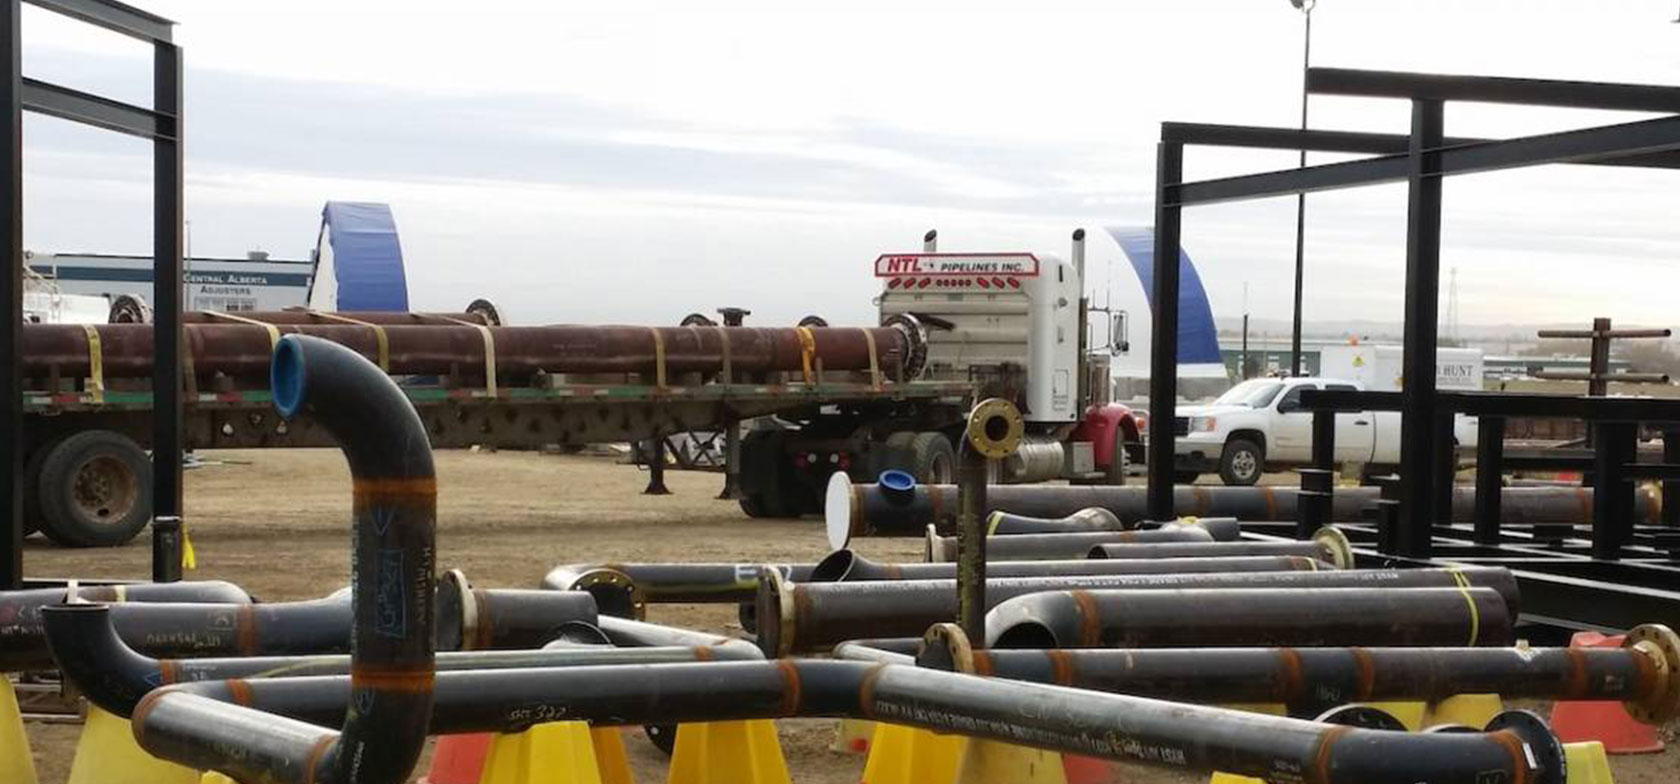 NTL Pipelines uses mobile forms to complete pipeline project